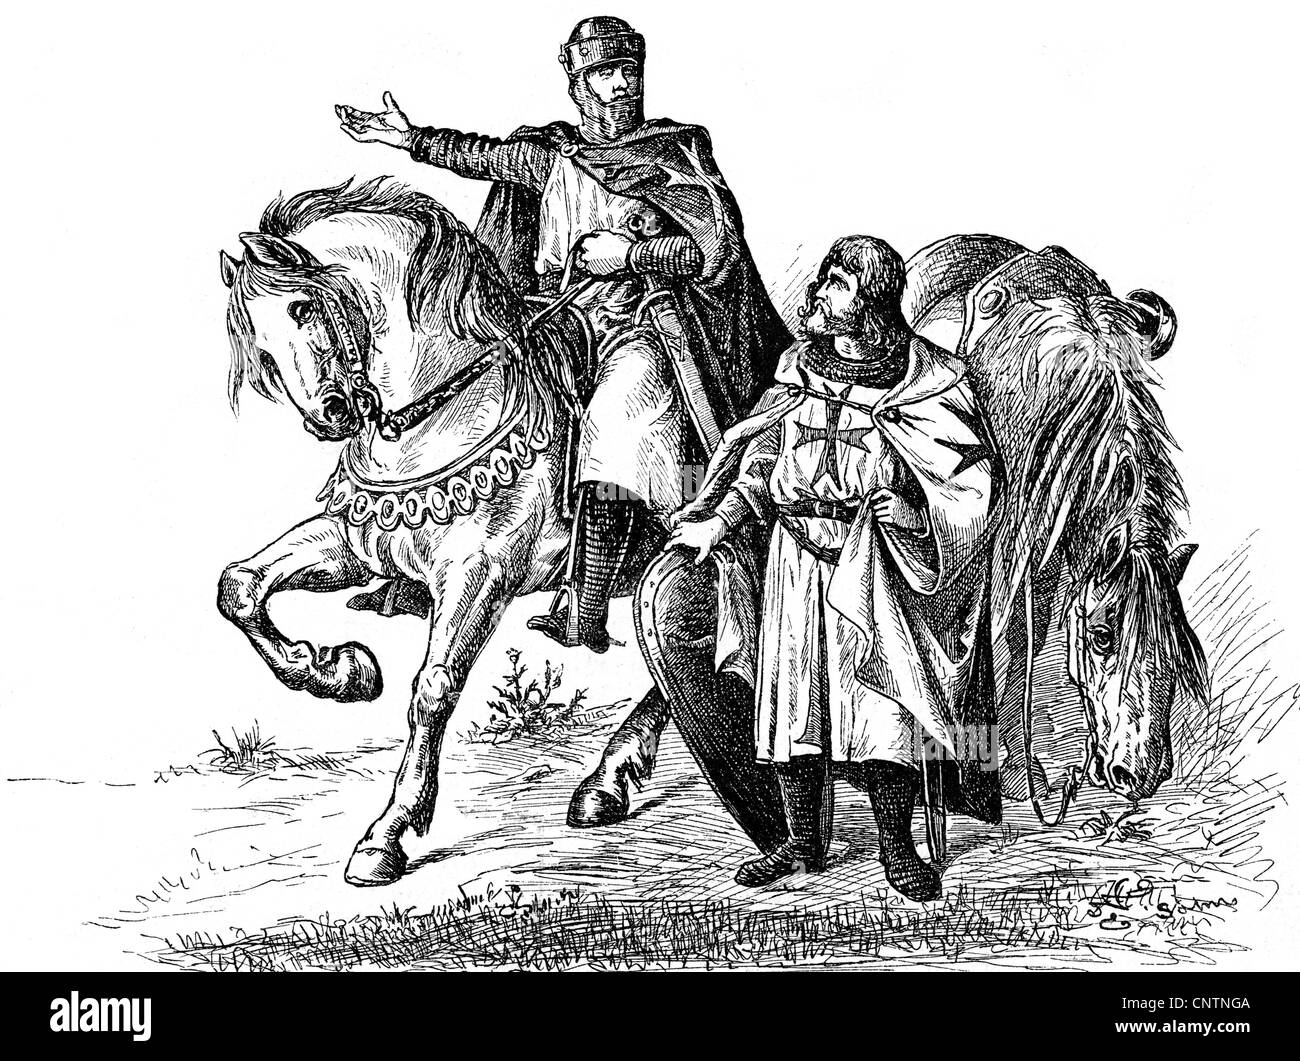 Middle Ages, knights, knight's orders, a member of the Order of Saint John (Bailiwick of Brandenburg) and a Knights Templar, wood engraving, 19th century, order of knights, knight order, order of knighthood, military, soldiers, soldier, sacred, spiritual, ecclesiastic, religious, cross, crosses, horse, horses, knight's armour, knight's armor, Order of the Knights Templar (Pauperes commilitones Christi templique salomonis), Poor Fellow-Soldiers of Christ and of the Temple of Solomon, Knight Hospitaller, historic, historical, medieval, NOT, people, Additional-Rights-Clearences-Not Available Stock Photo